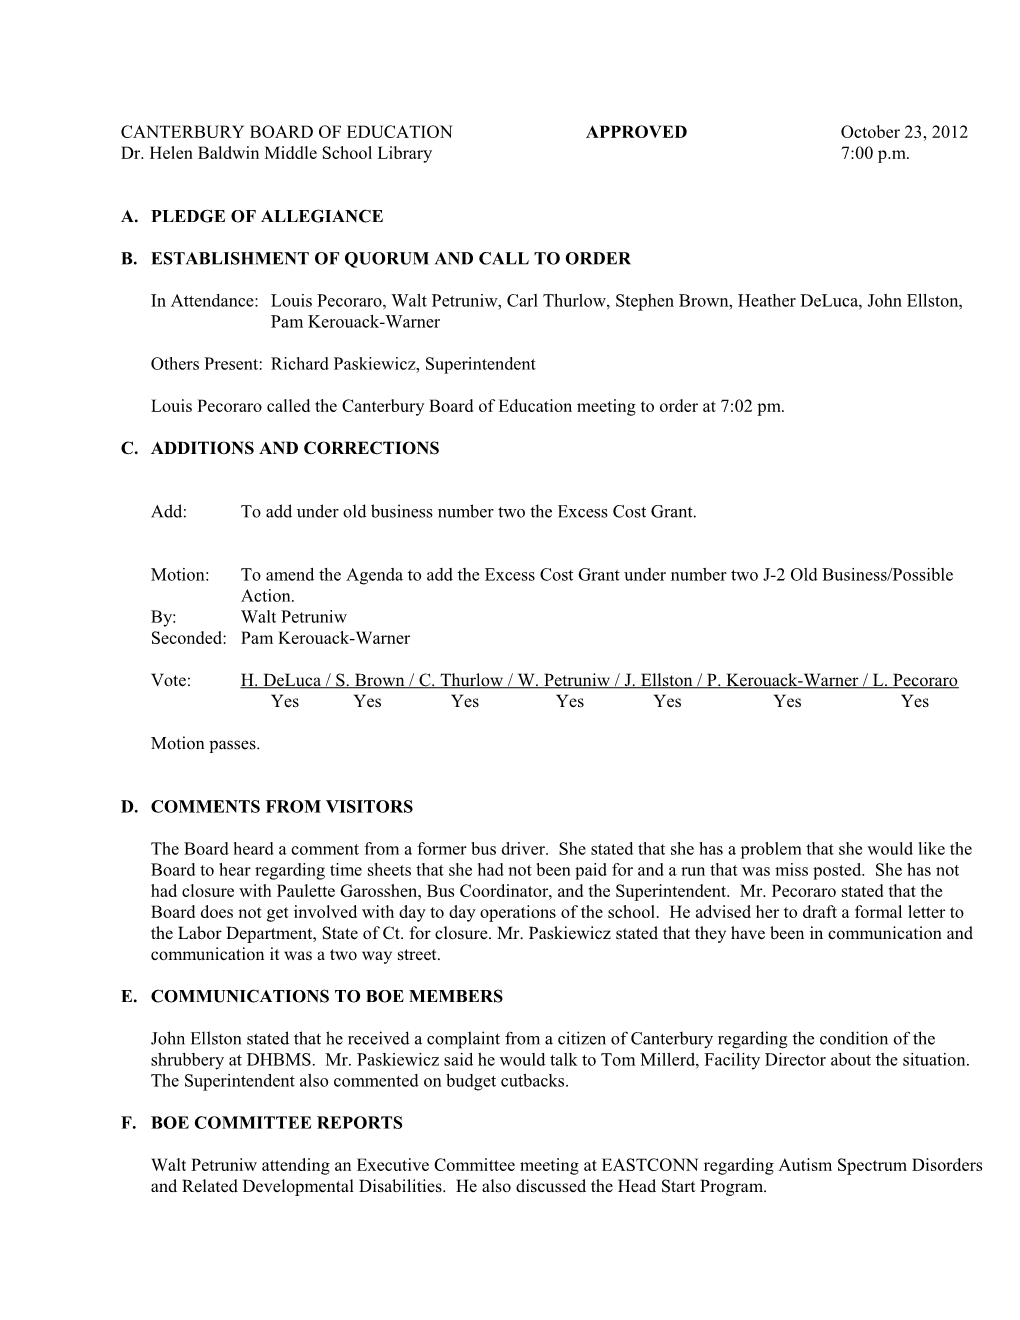 CANTERBURY BOARD of EDUCATION Approvedoctober 23, 2012